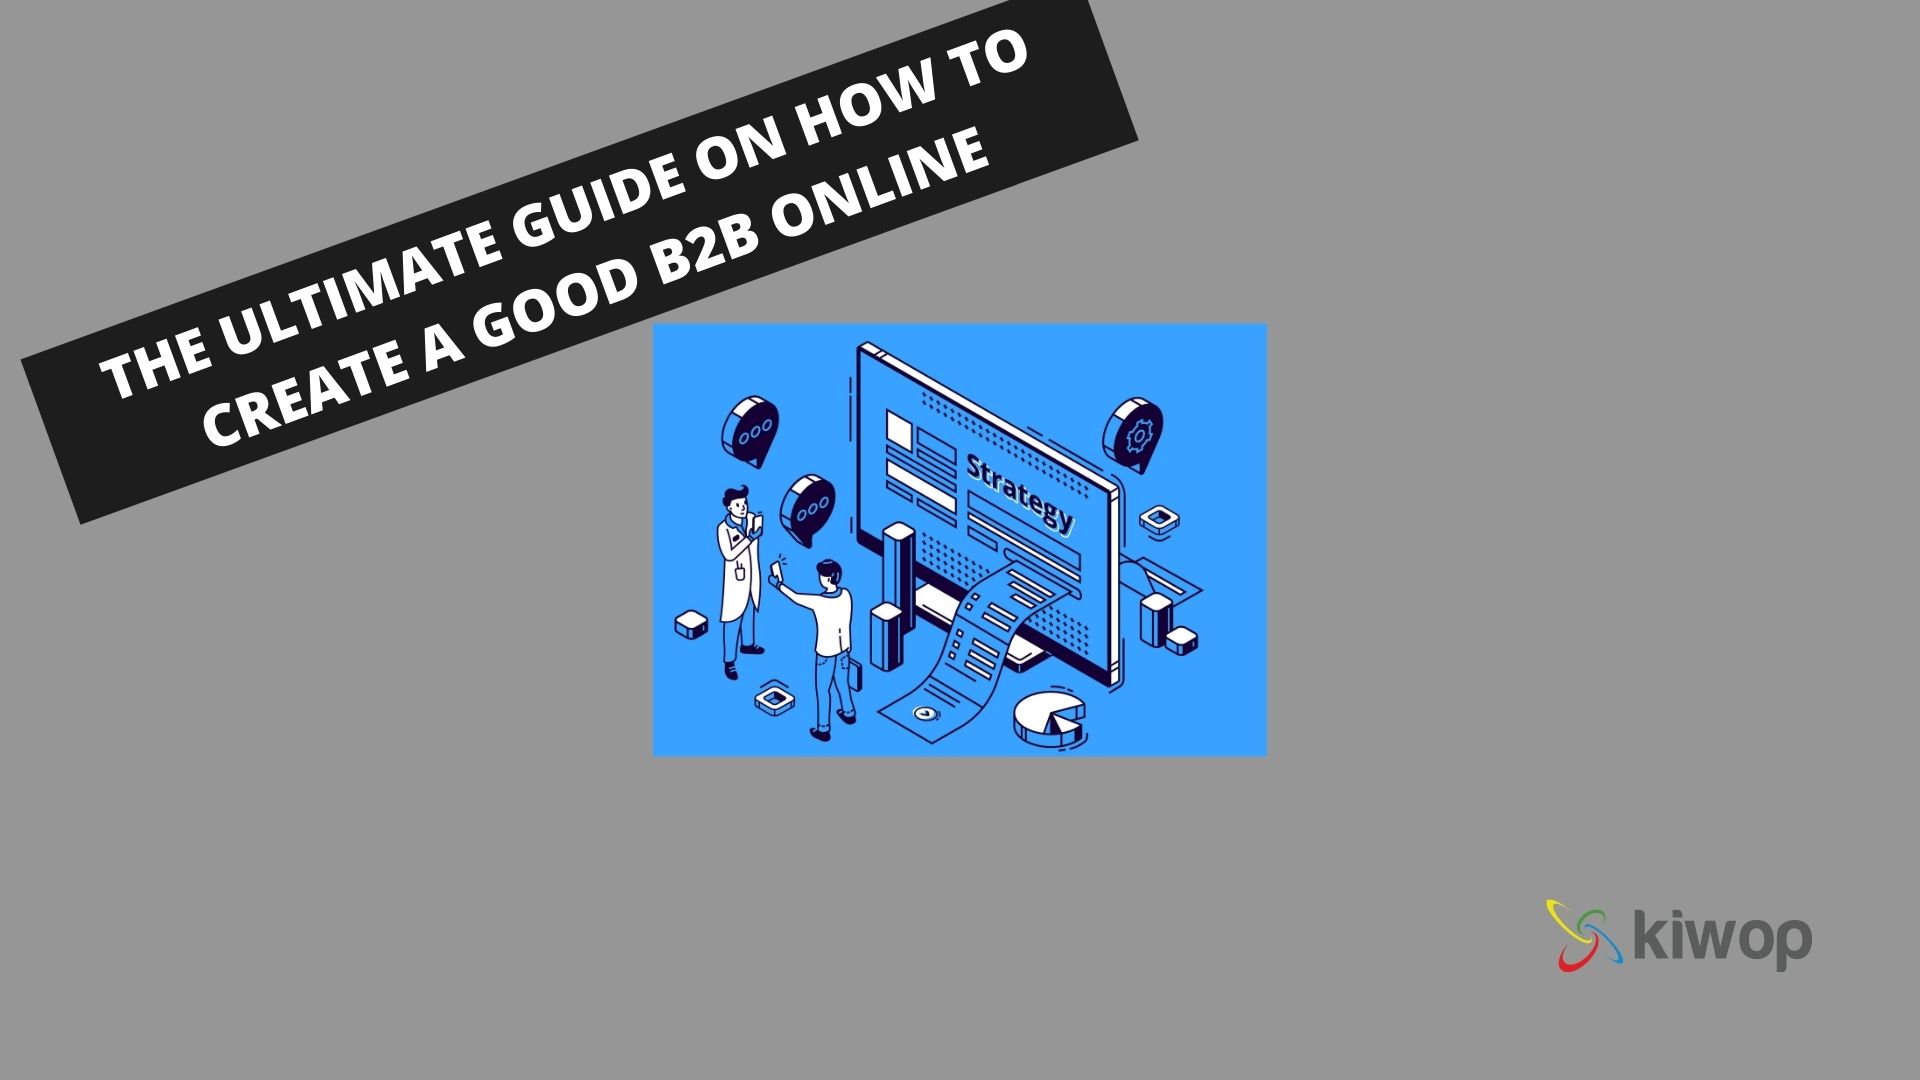 The ultimate guide on how to create a good B2B online